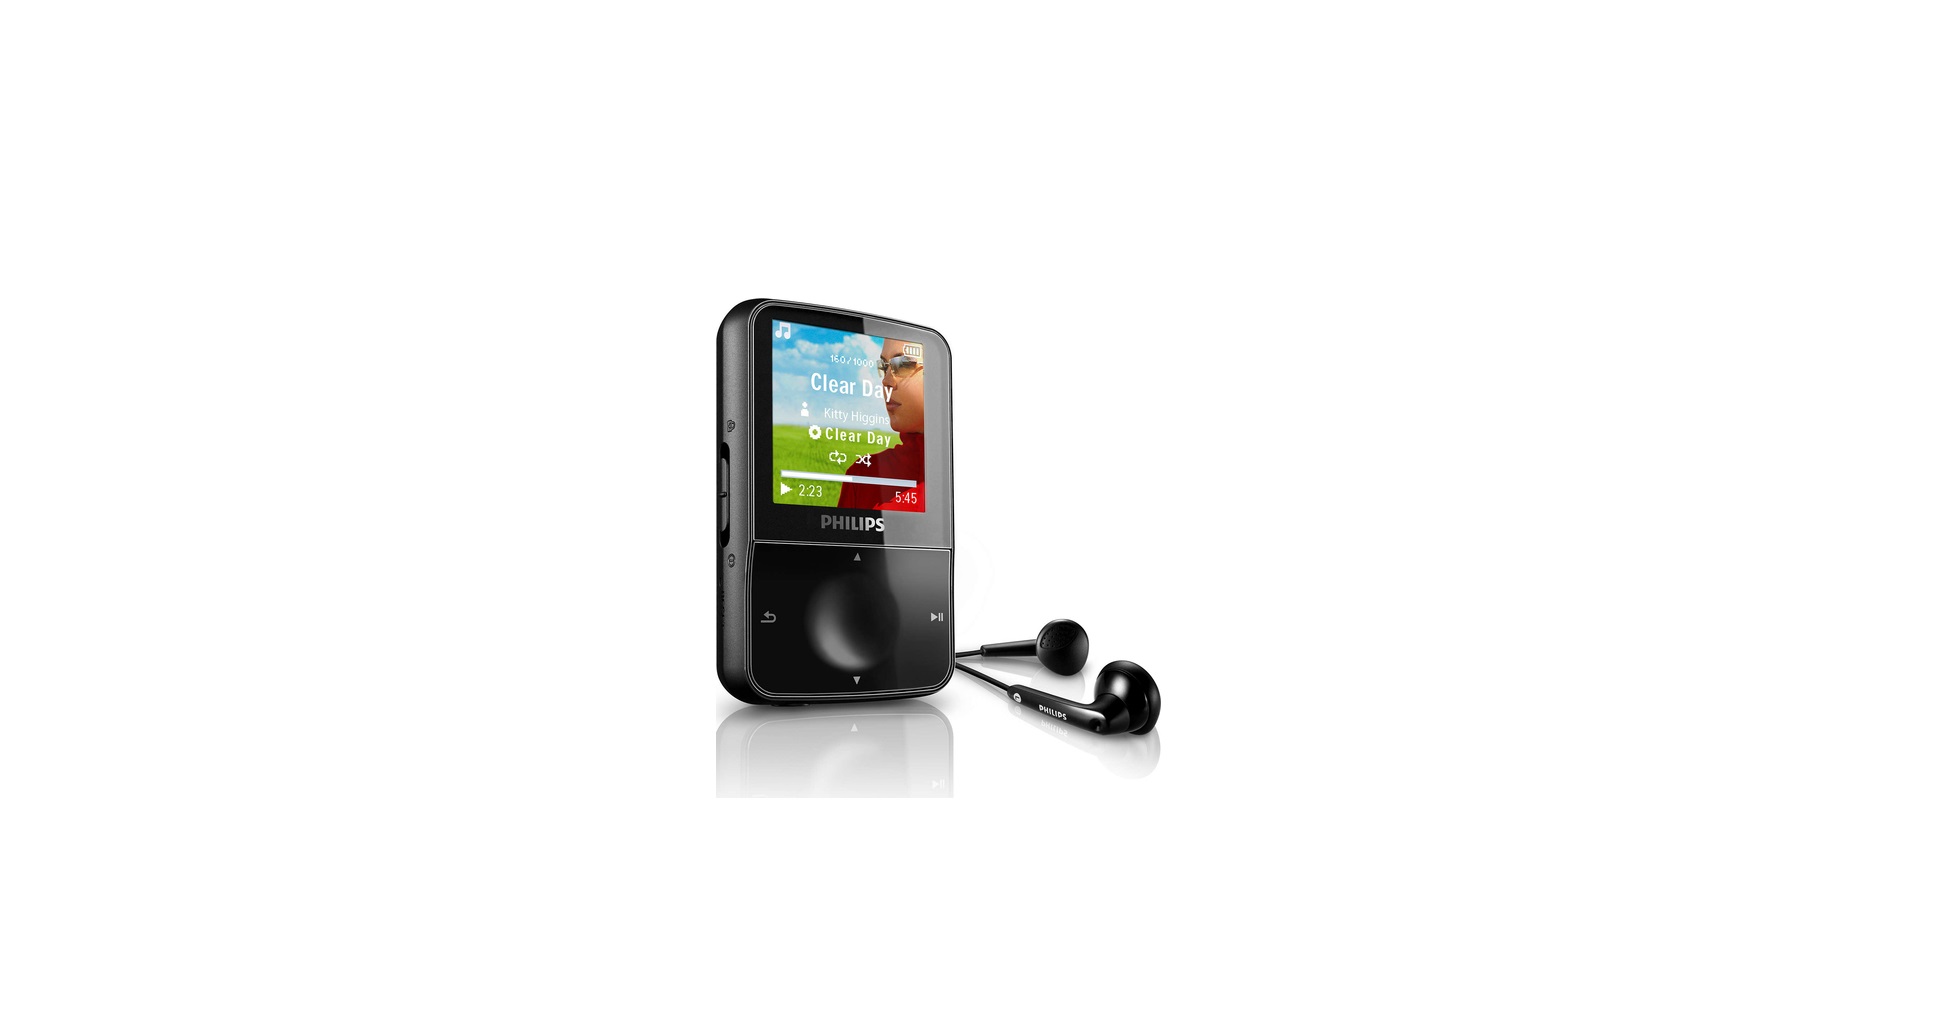 PHILIPS GOGEAR SA1VBE02 MP3 PLAYER featured